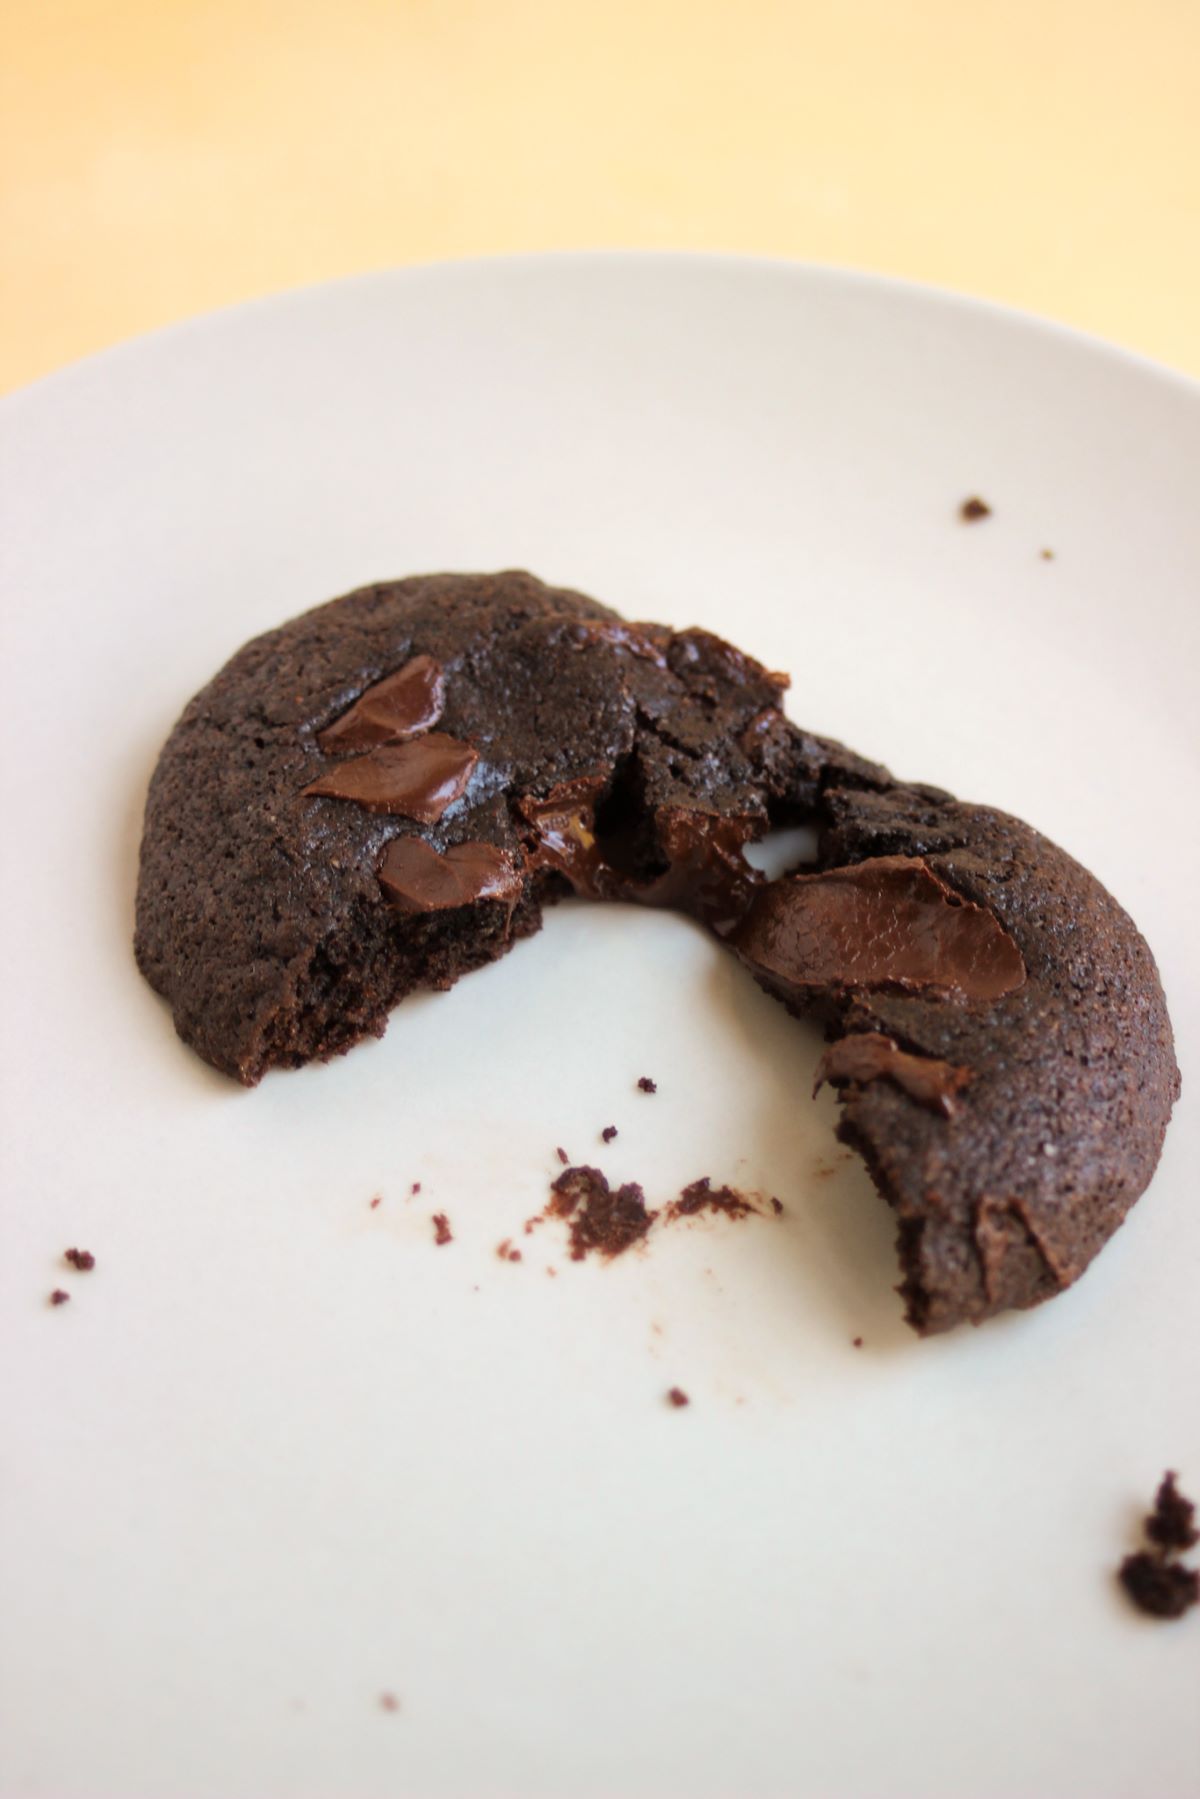 Chocolate cookie cut in two on a white plate.